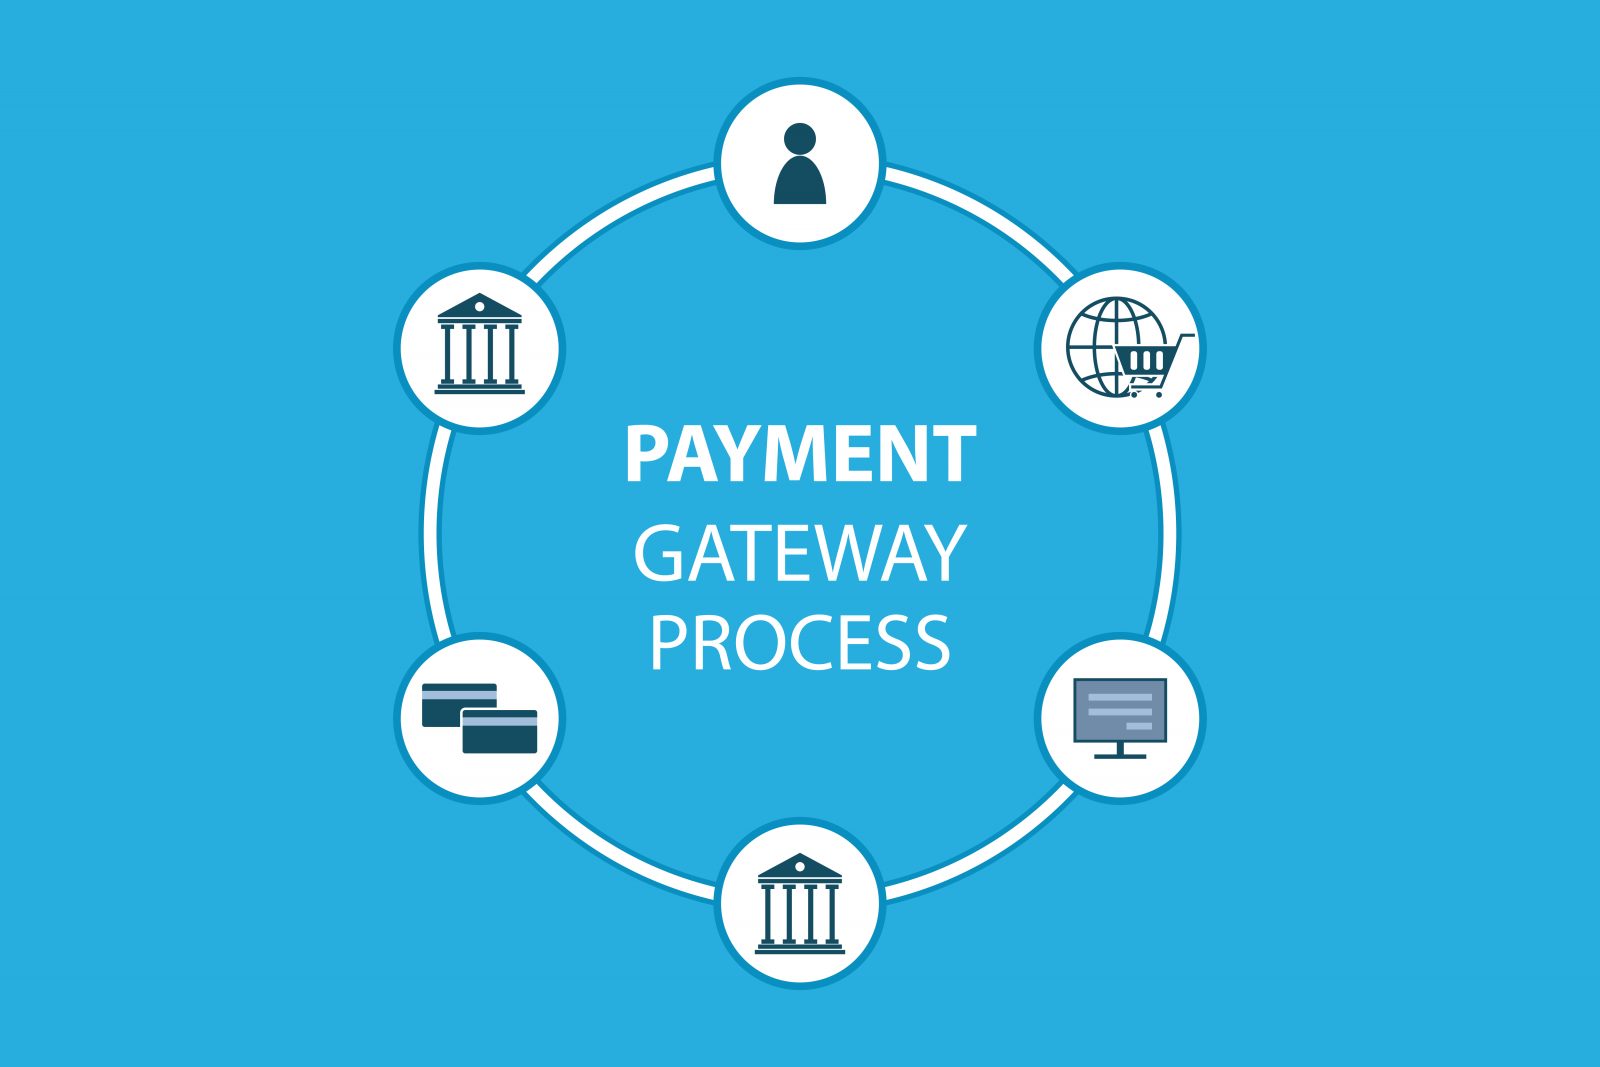 Learn who the key players are in the payment gateway process.